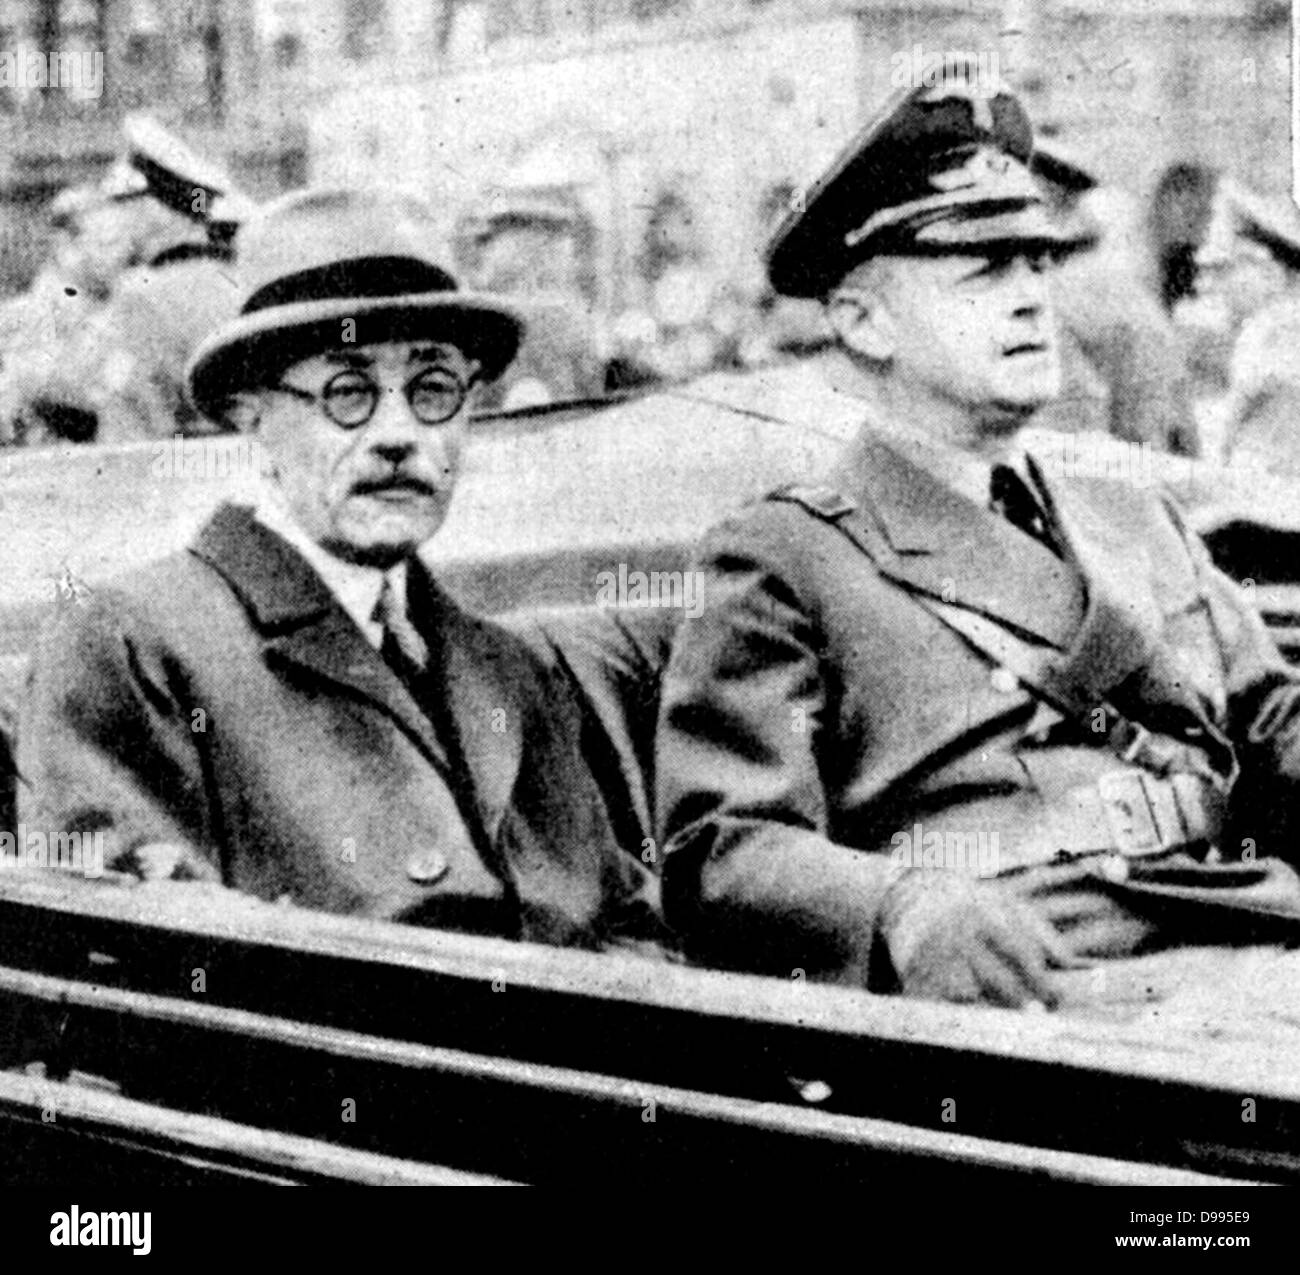 Count Paul Teleki (1879-1941) Prime Minister of Hungary, driving through Munich with Joachim von Ribbentrop, German Foreign Minister, when visiting Germany to discuss Hungary's claims to Transylvania. Stock Photo